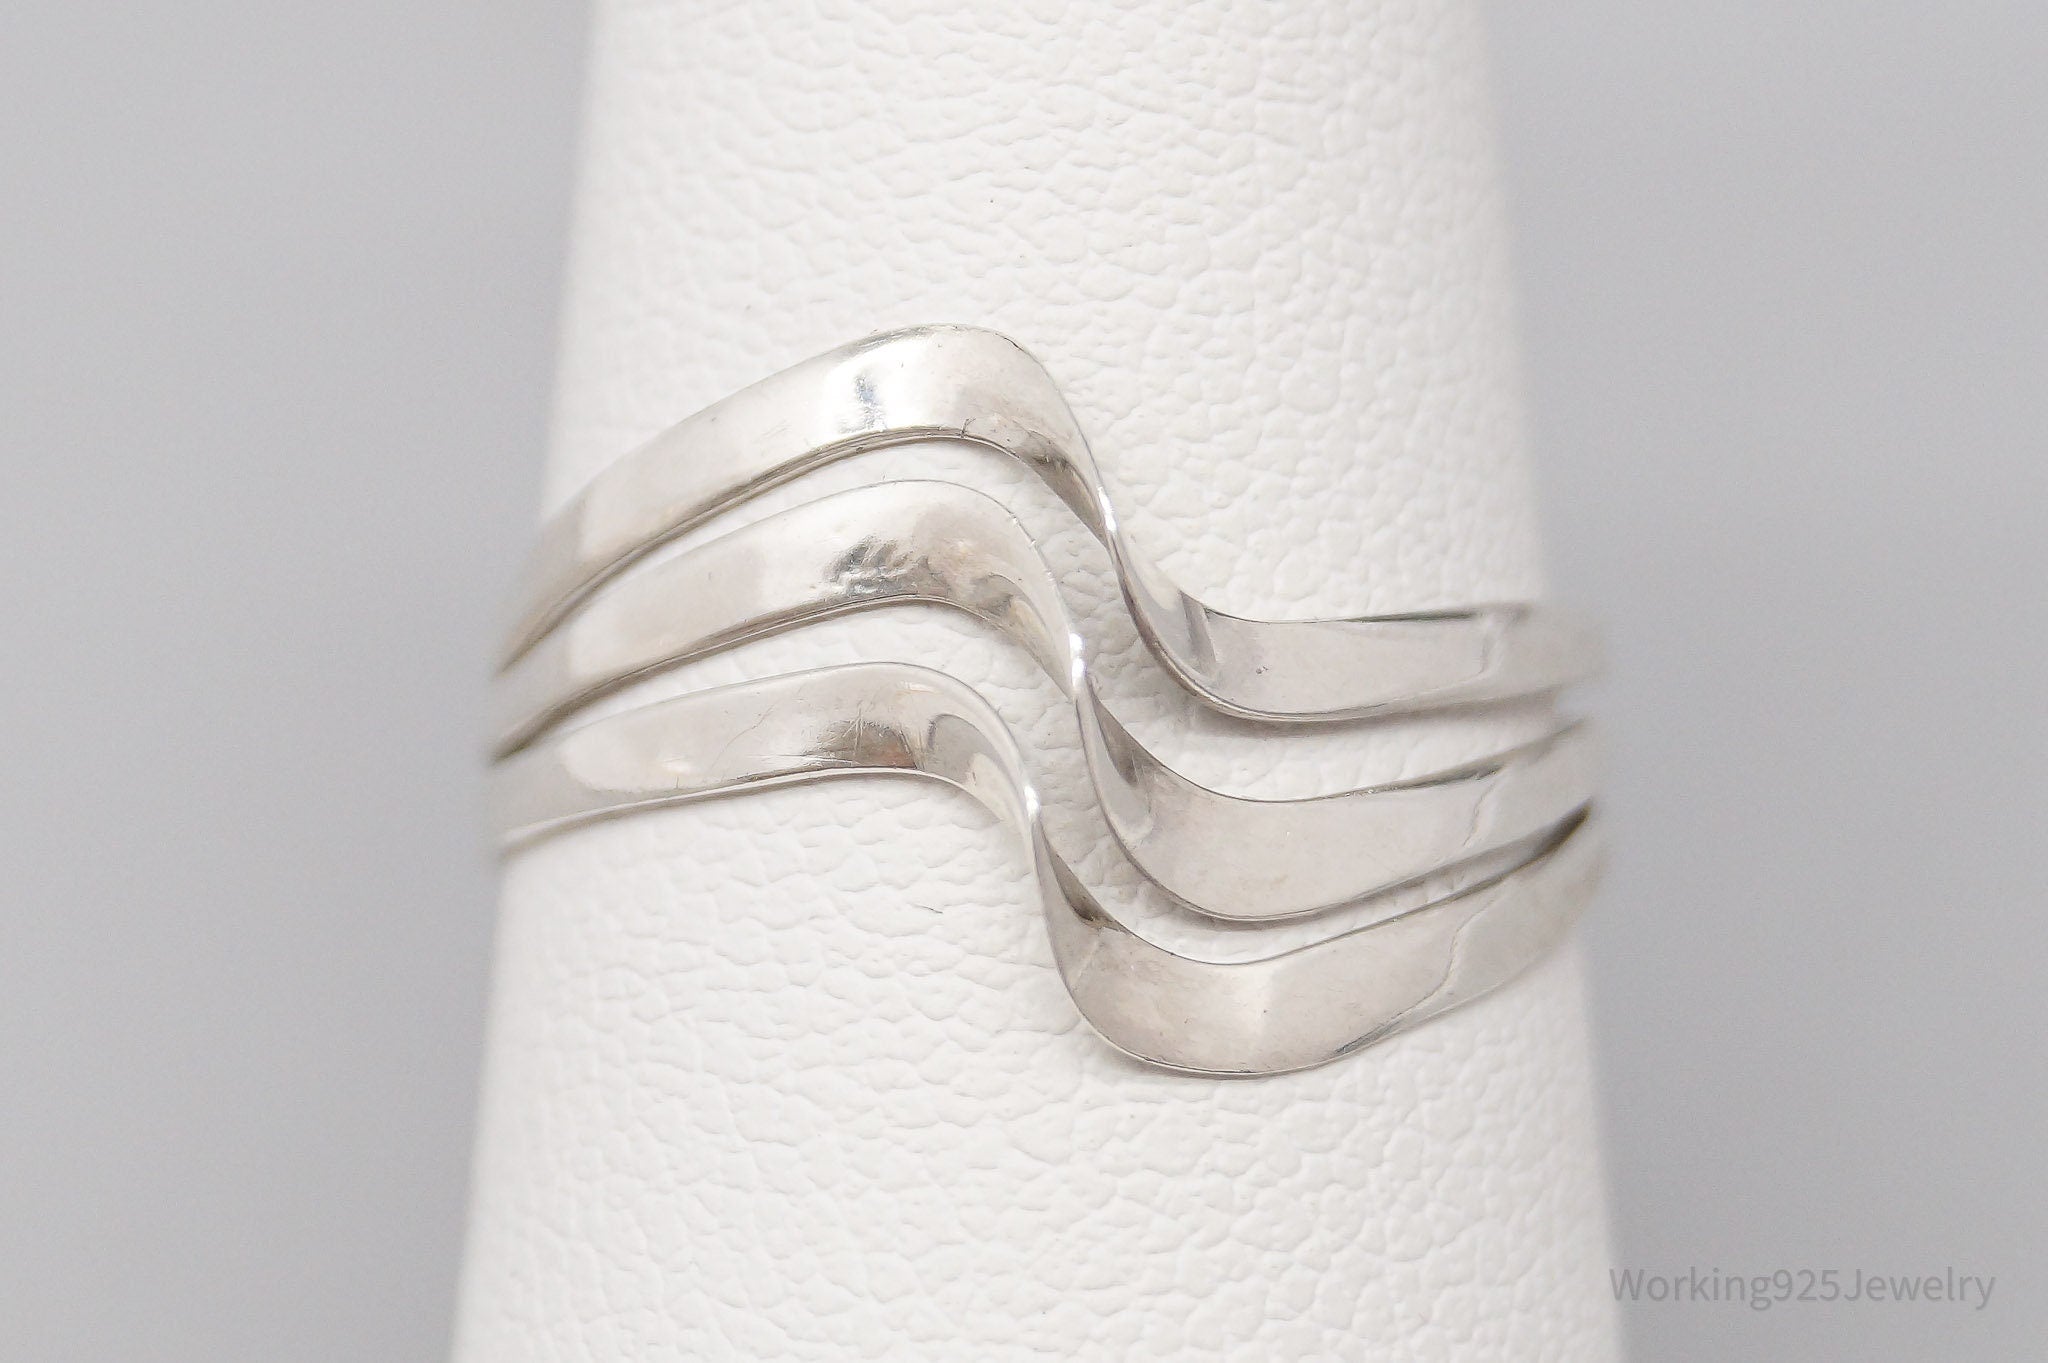 Vintage Mexico Modernist Waves Sterling Silver Ring - Size 6.75